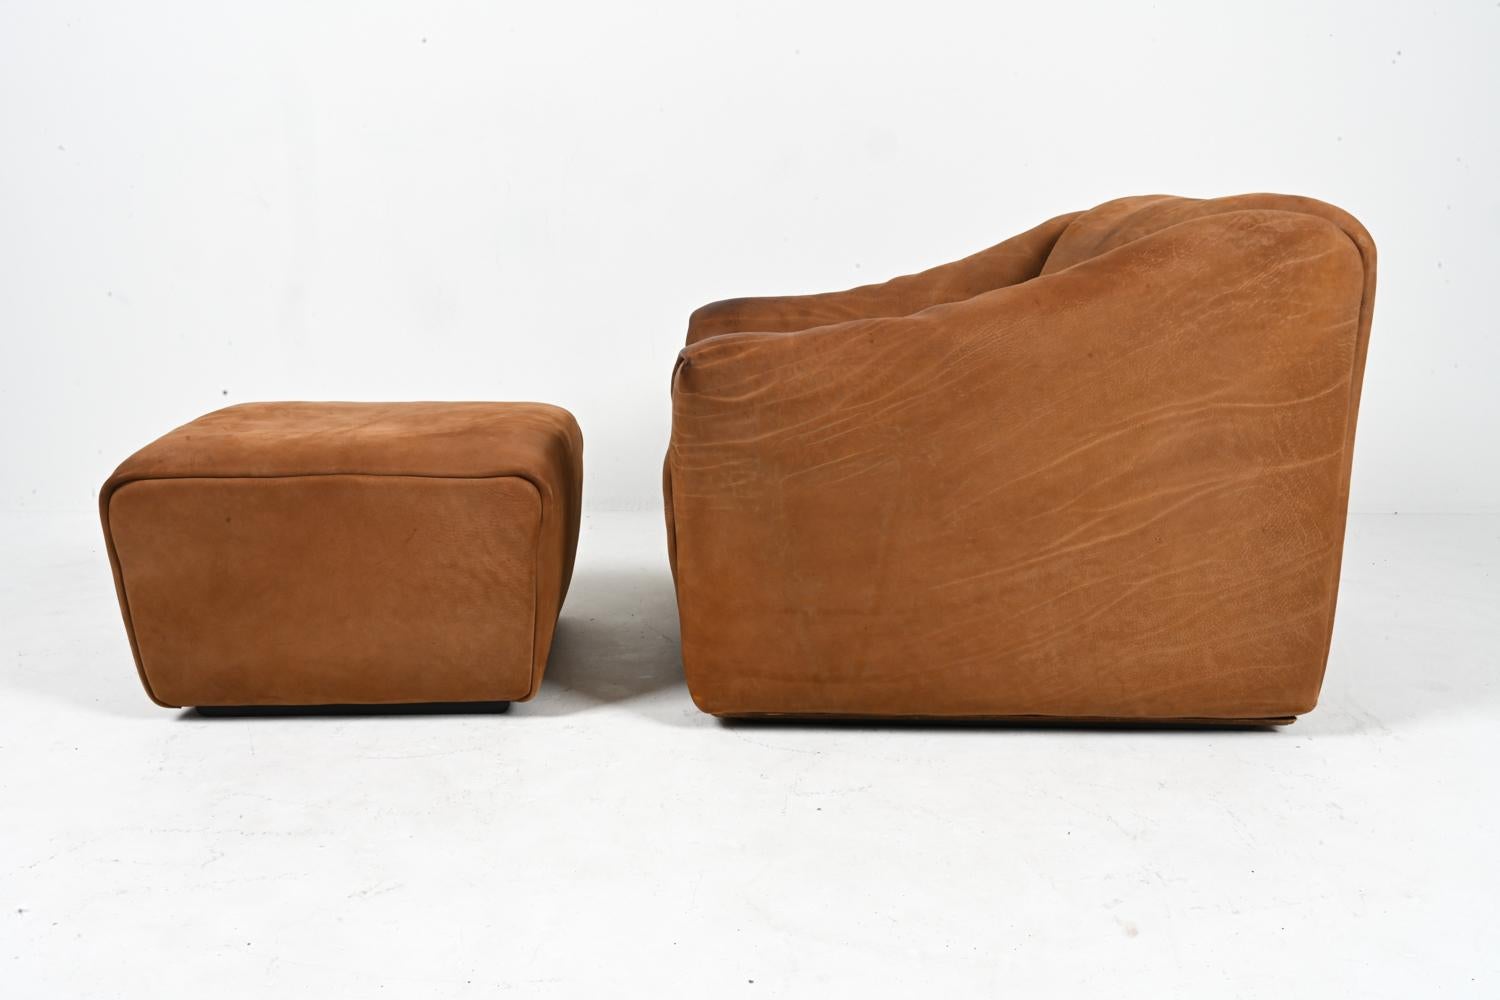 De Sede DS-47 Lounge Chair & Ottoman in Nubuck Leather, c. 1970's For Sale 3